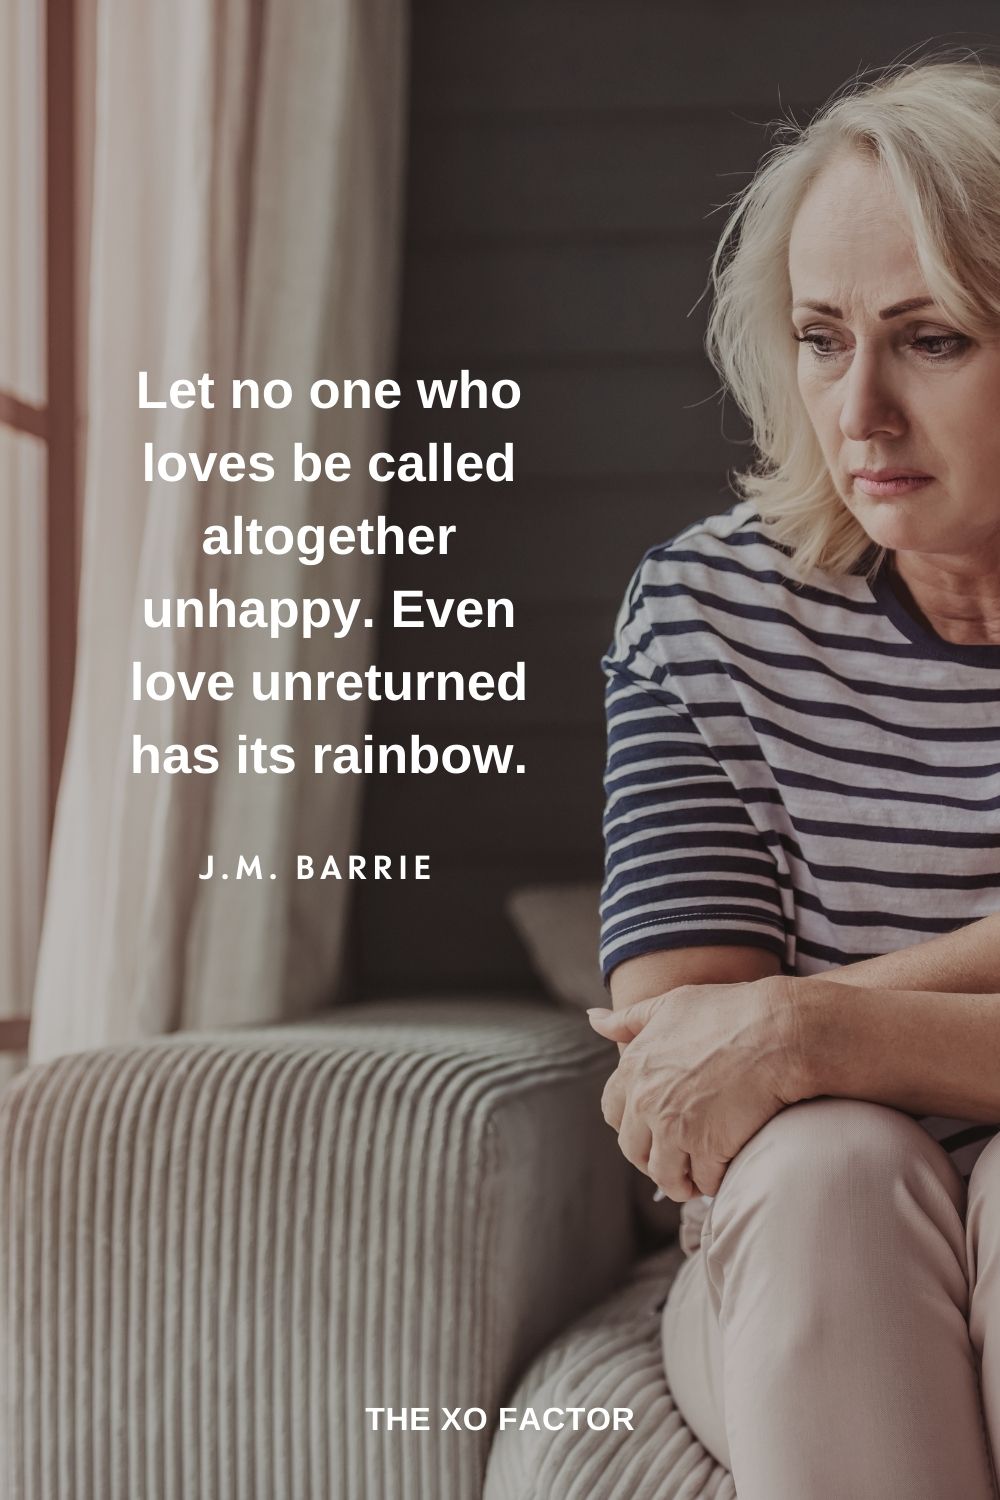 Let no one who loves be called altogether unhappy. Even love unreturned has its rainbow. J.M. Barrie